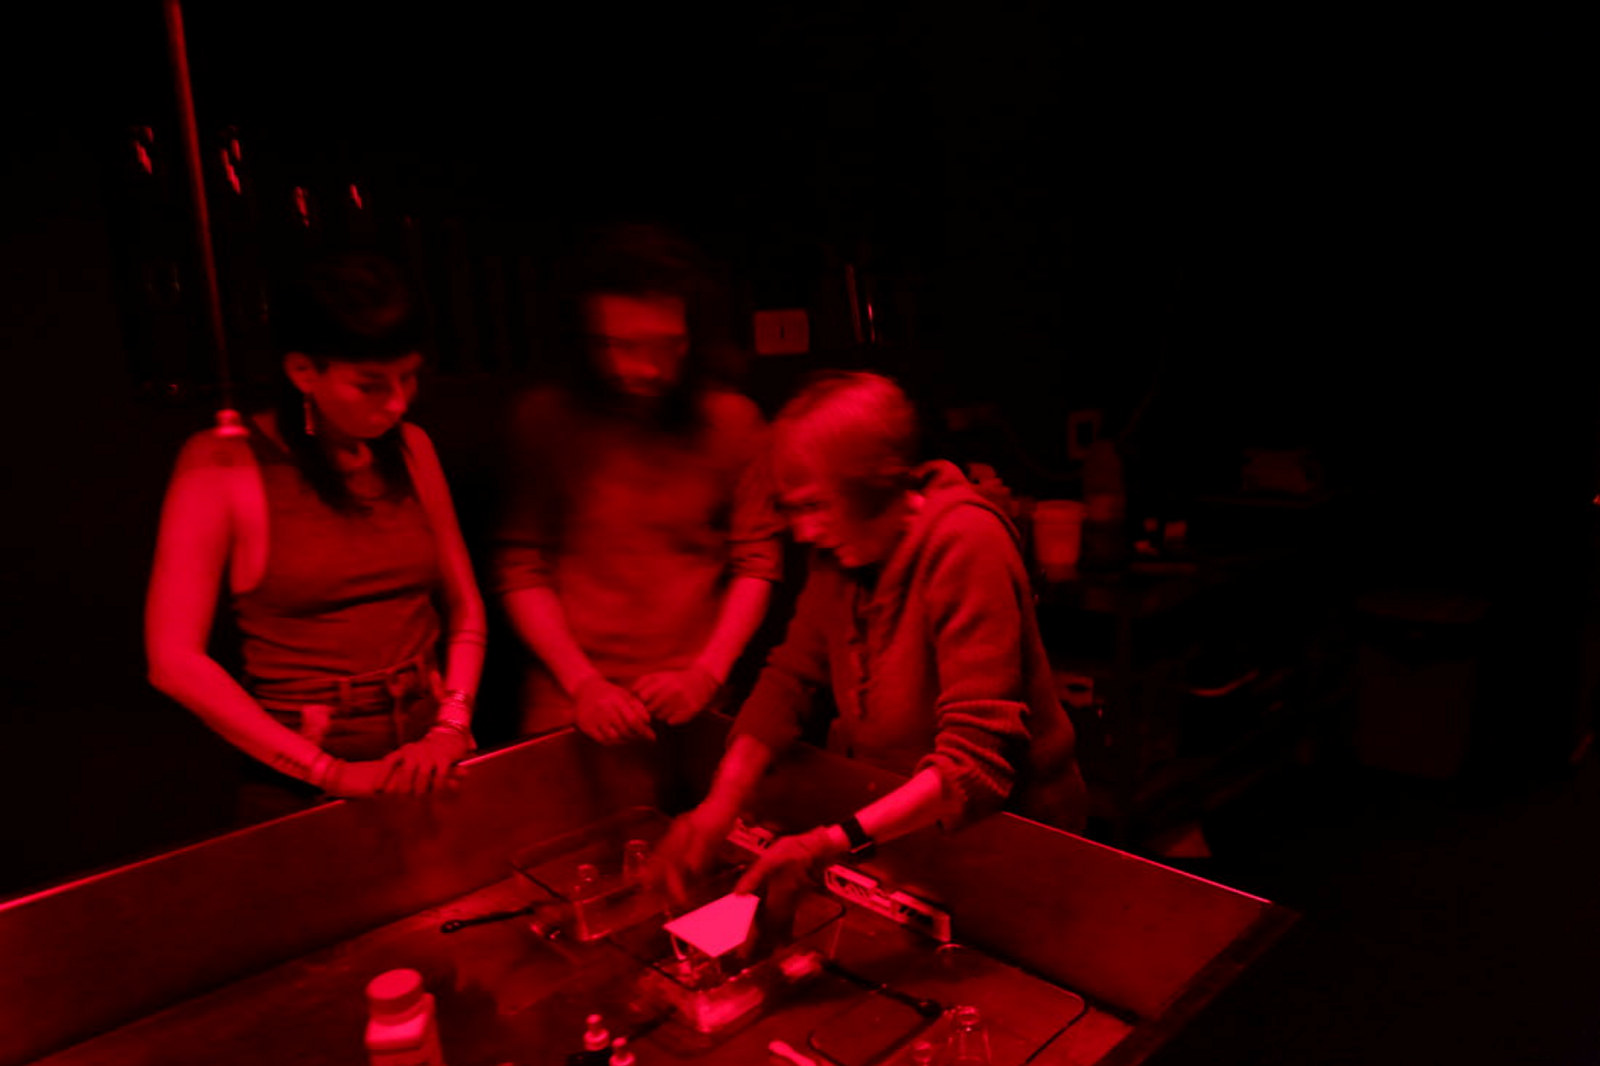 Group in red-lit darkroom working with glass plates and emulsion.